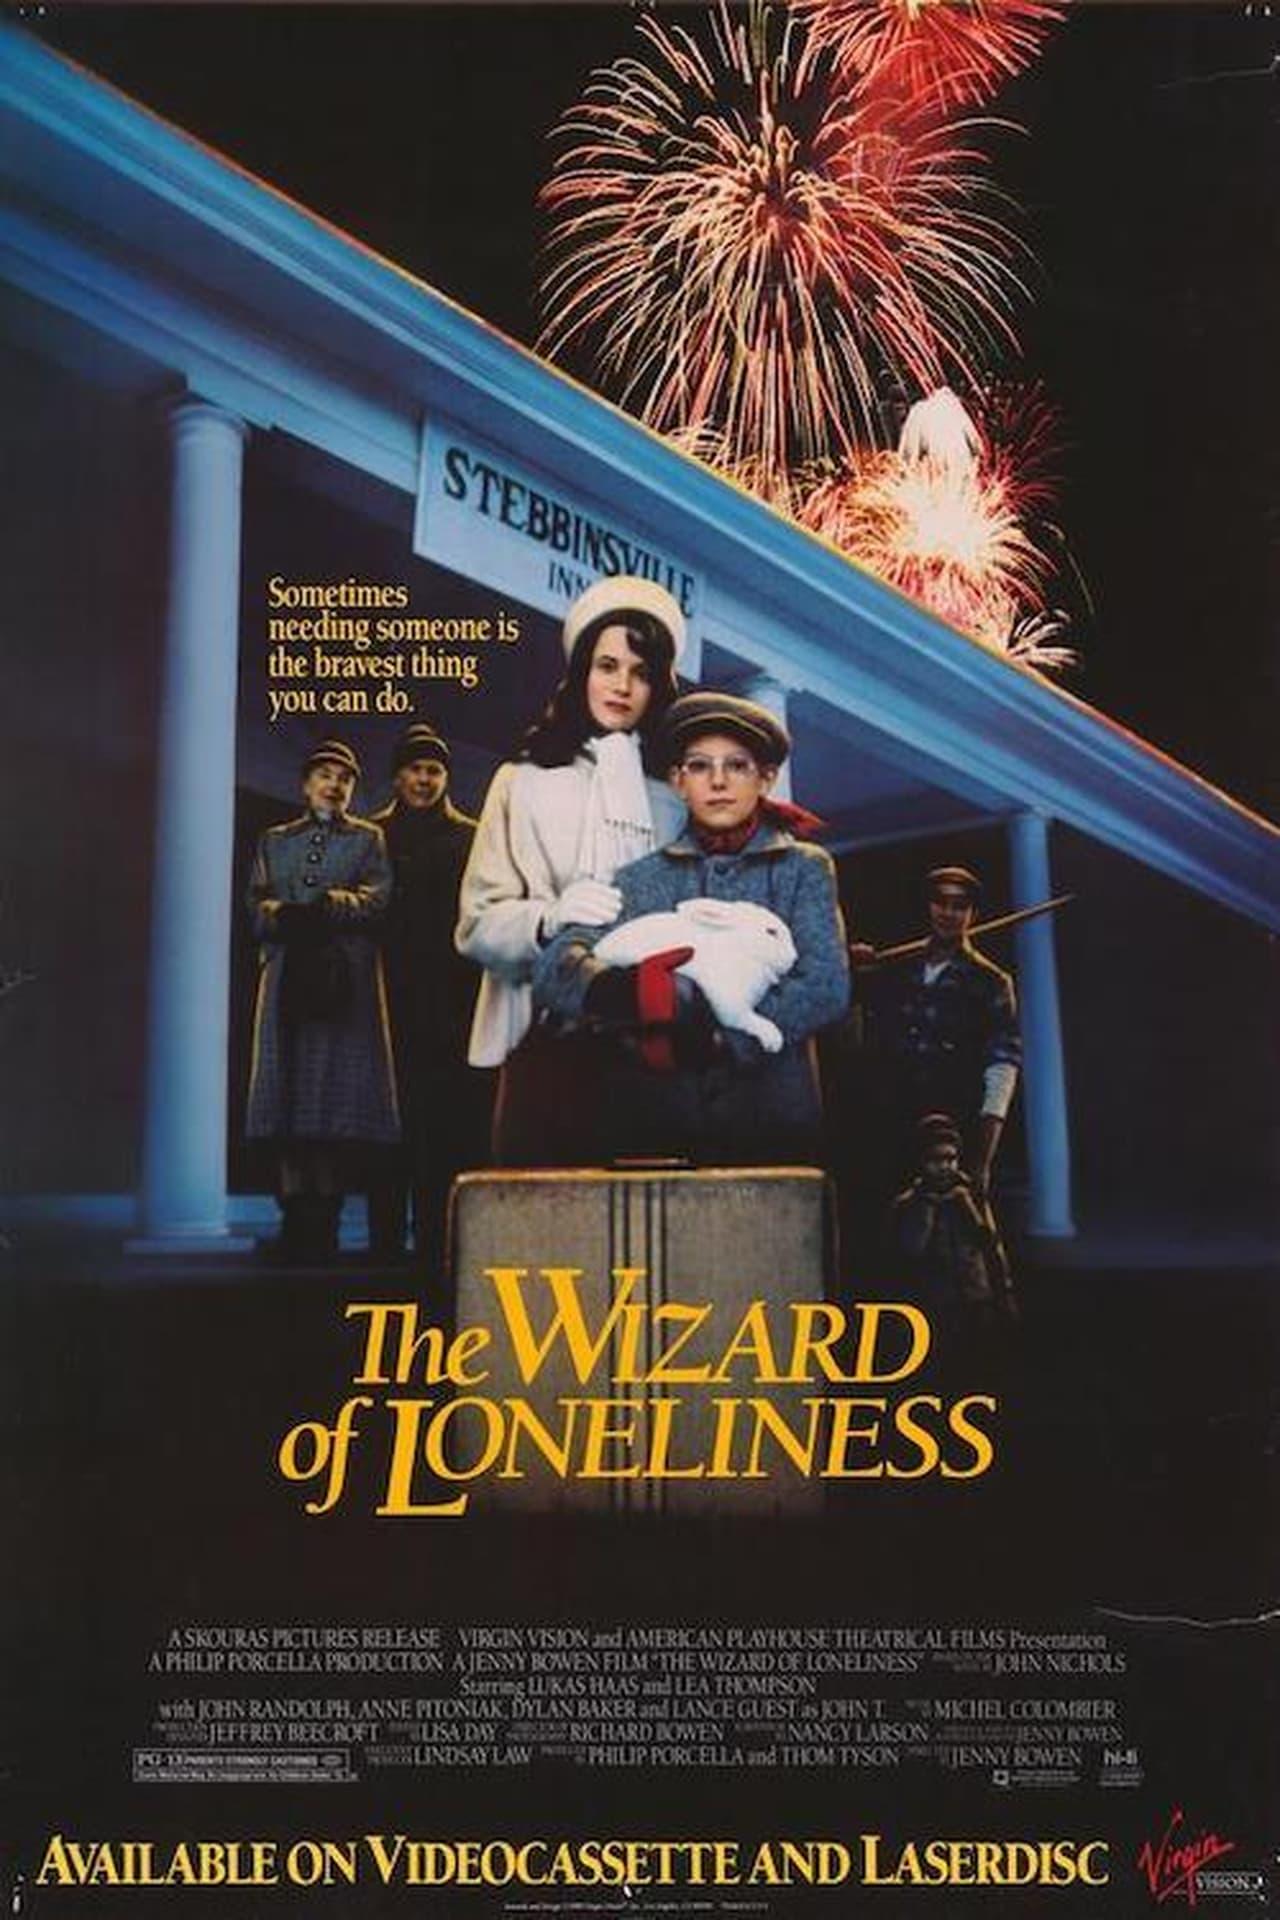 The Wizard of Loneliness poster